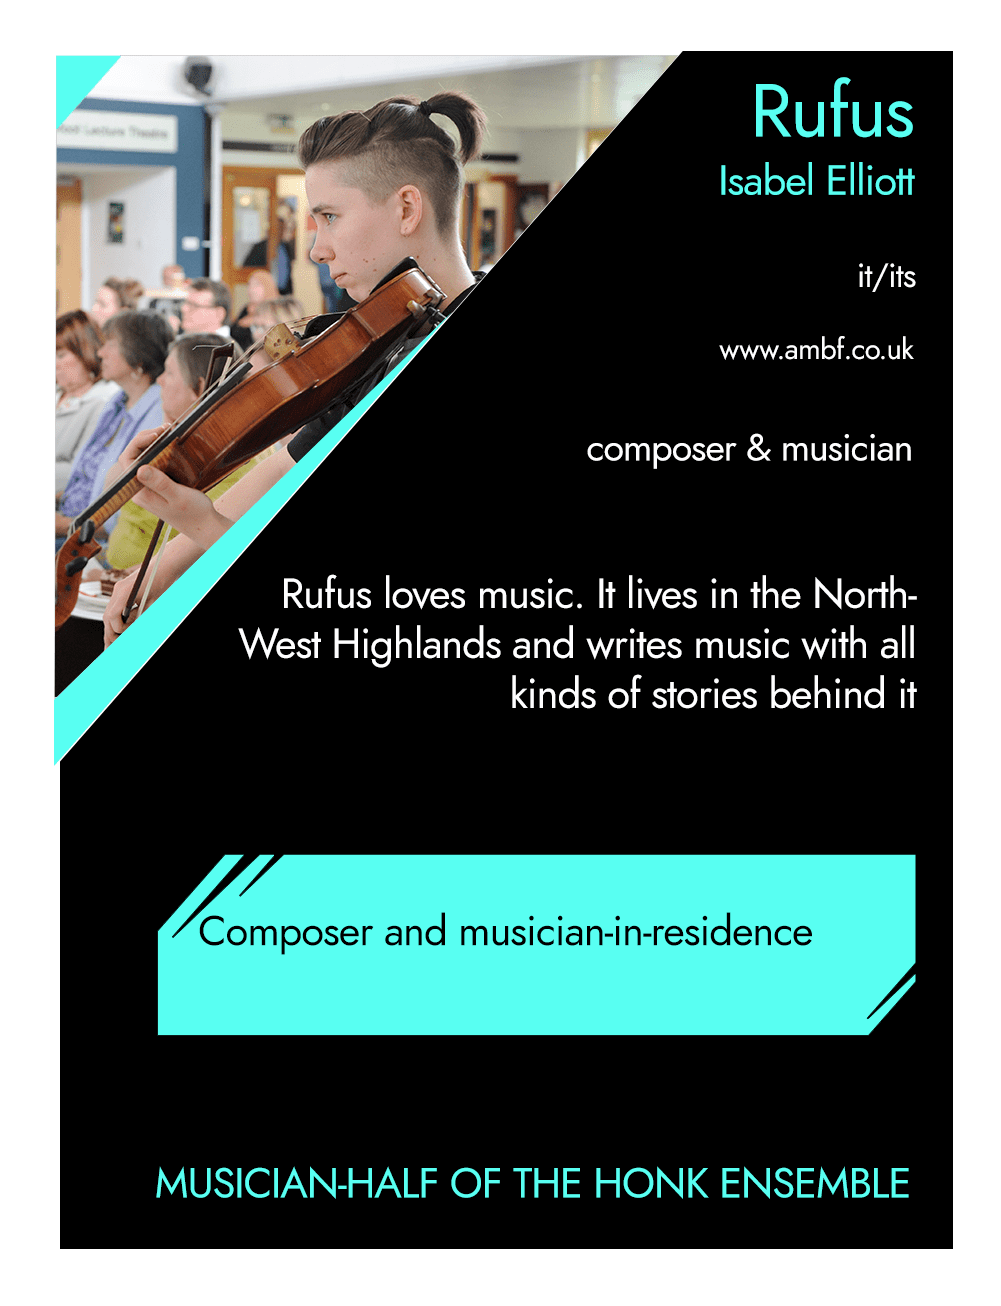 This is the front of an artist announcement card for Rufus. The design is styled on an American baseball card. The card has a thin white border and the rest of the card is black with turquoise accents. On the left hand corner, there is a triangular cross section of a photo of Rufus. In it musician Rufus Elliot is pictured playing its viola, focusing on something out of shot. It is wearing a black short sleeved shirt, with its short hair tied up at the back. To the right of the photo, there is the artist's name, Rufus, pronouns, it/its, website, www.ambf.co.uk, and artistic practice, composer & musician. Below this is a short artist biography, which reads Rufus loves music. It lives in the North West Highlands and writes music with all kinds of stories behind it. In a turquoise rectangle below this, the card highlights what the artist’s role is within CRIPtic. For Rufus this reads Composer and musician in residence. Below this is a quote selected by the artist. This reads: Musician-half of the HONK Ensemble.